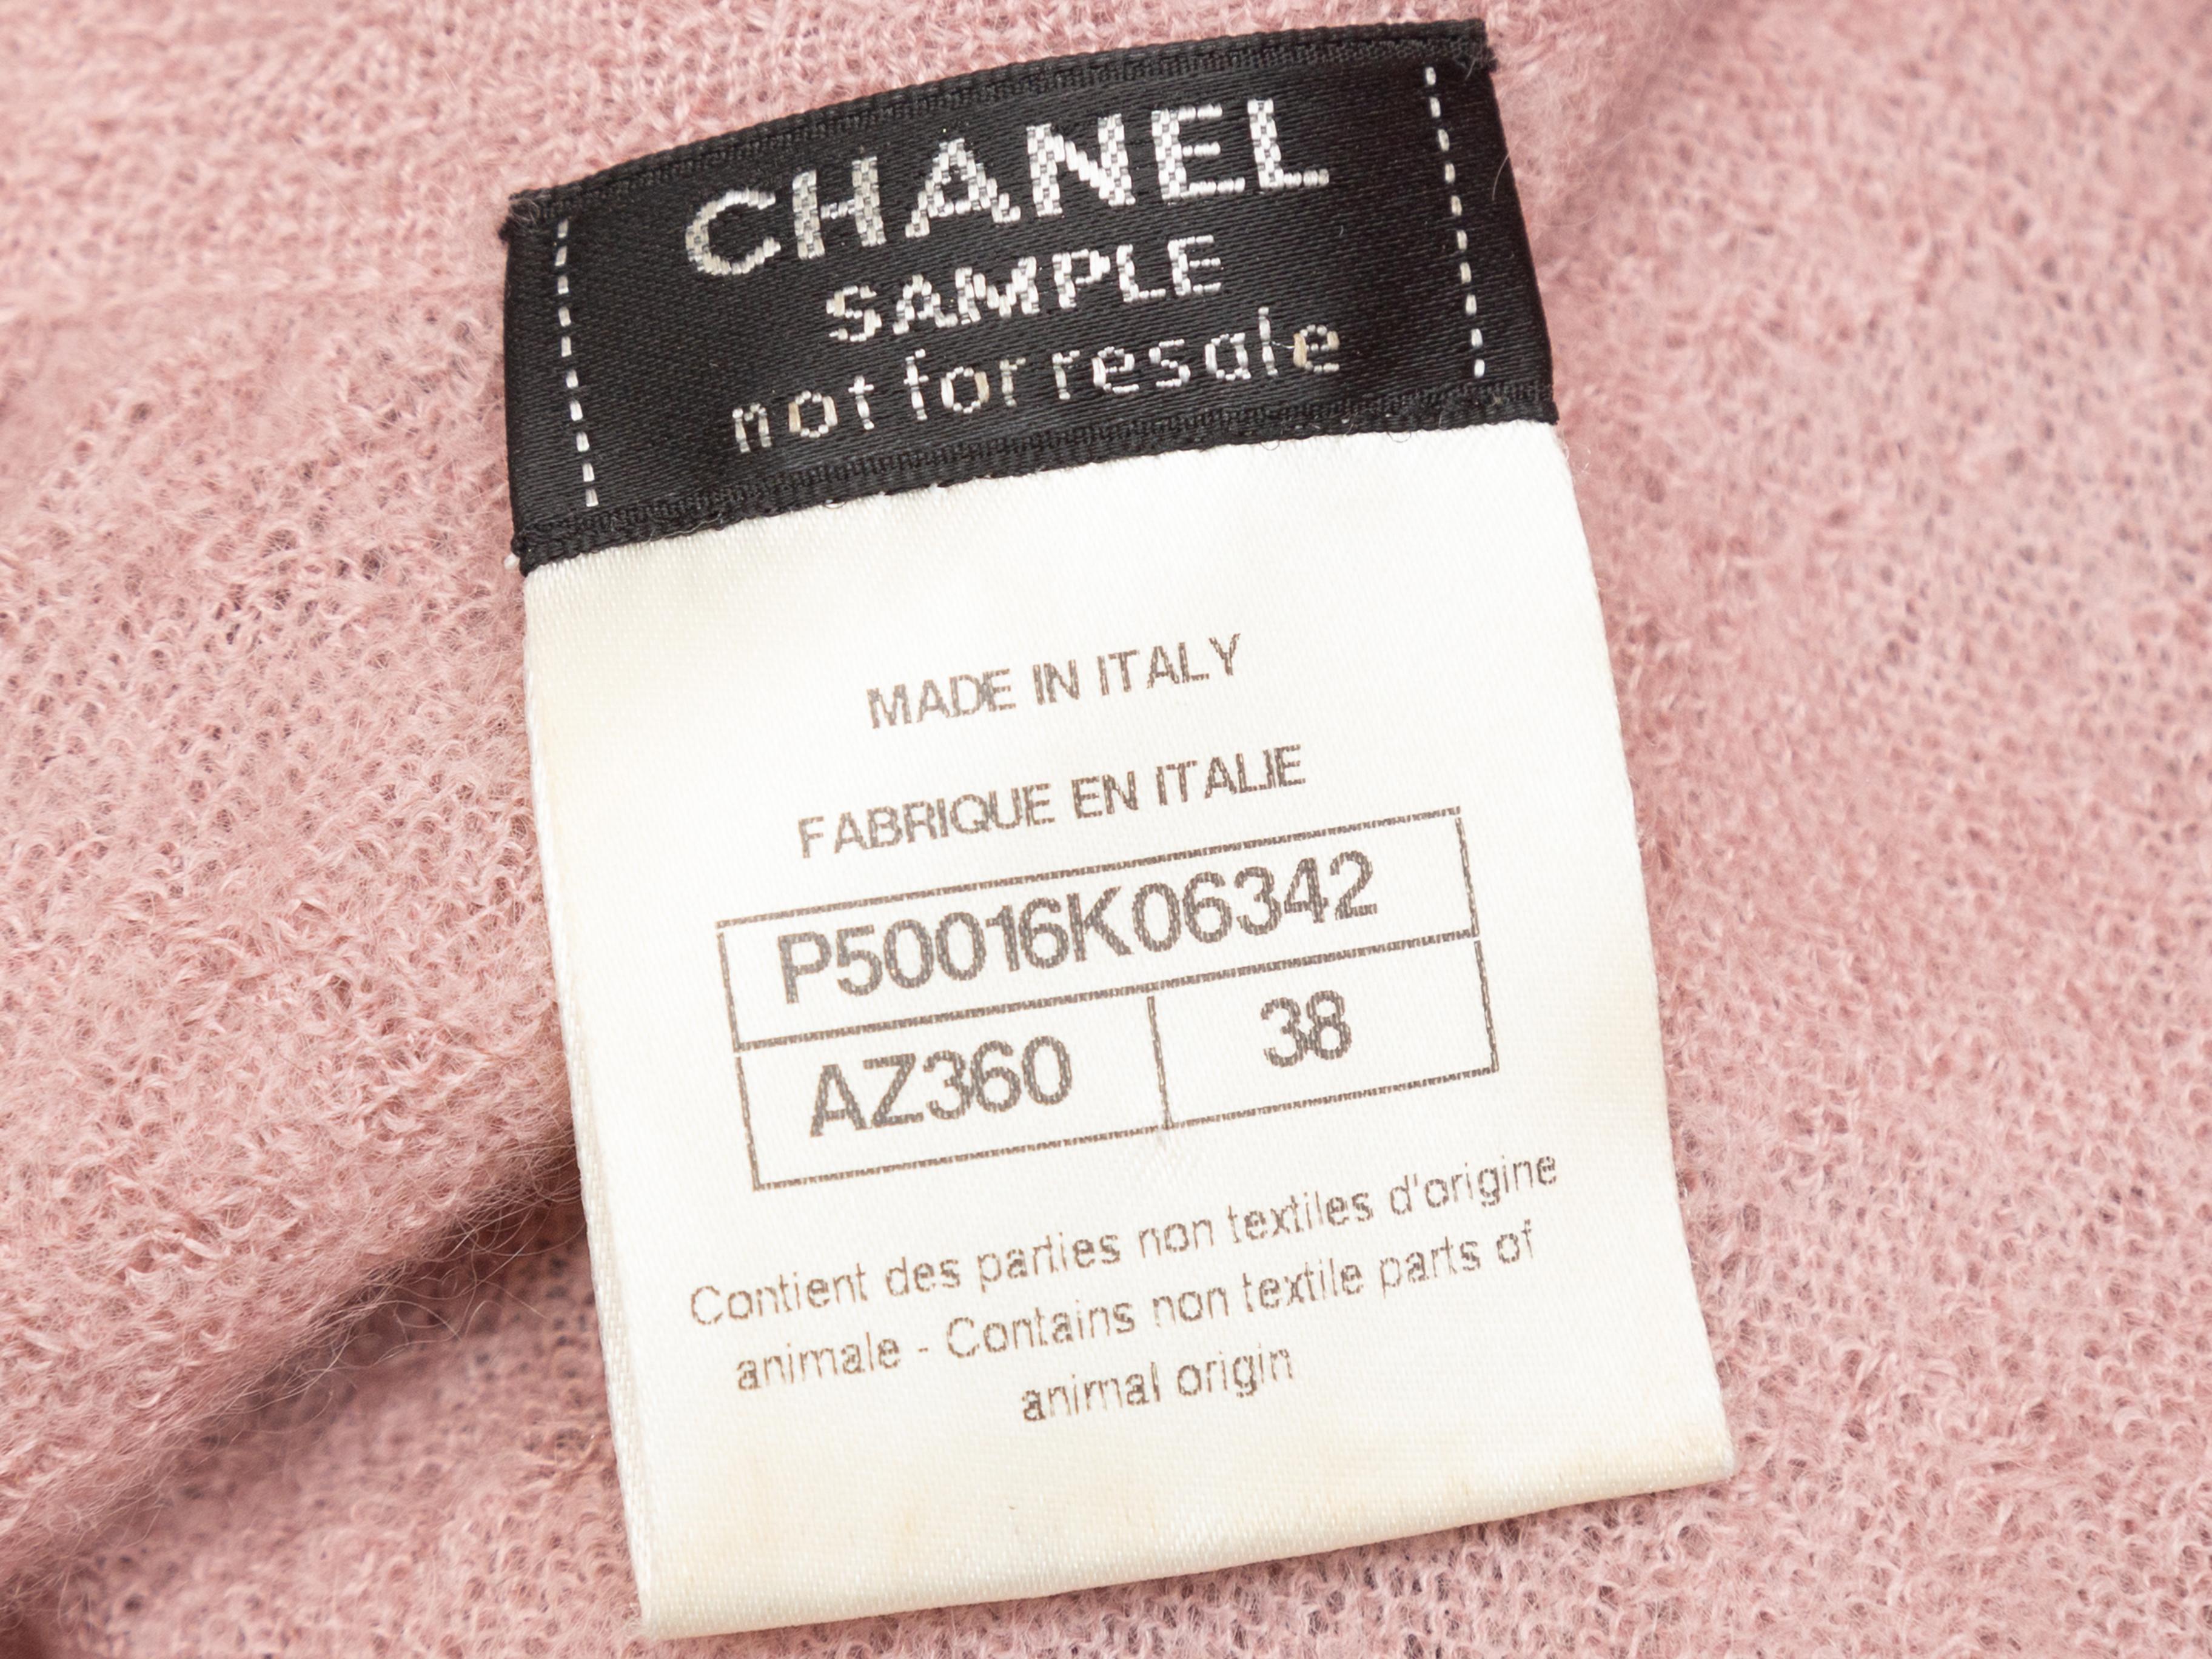 Product details: Light pink mohair and cashmere knit dress by Chanel. Crew neck. Long sleeves. Faux pearl embellishments at bodice. Zip closure at back. 33